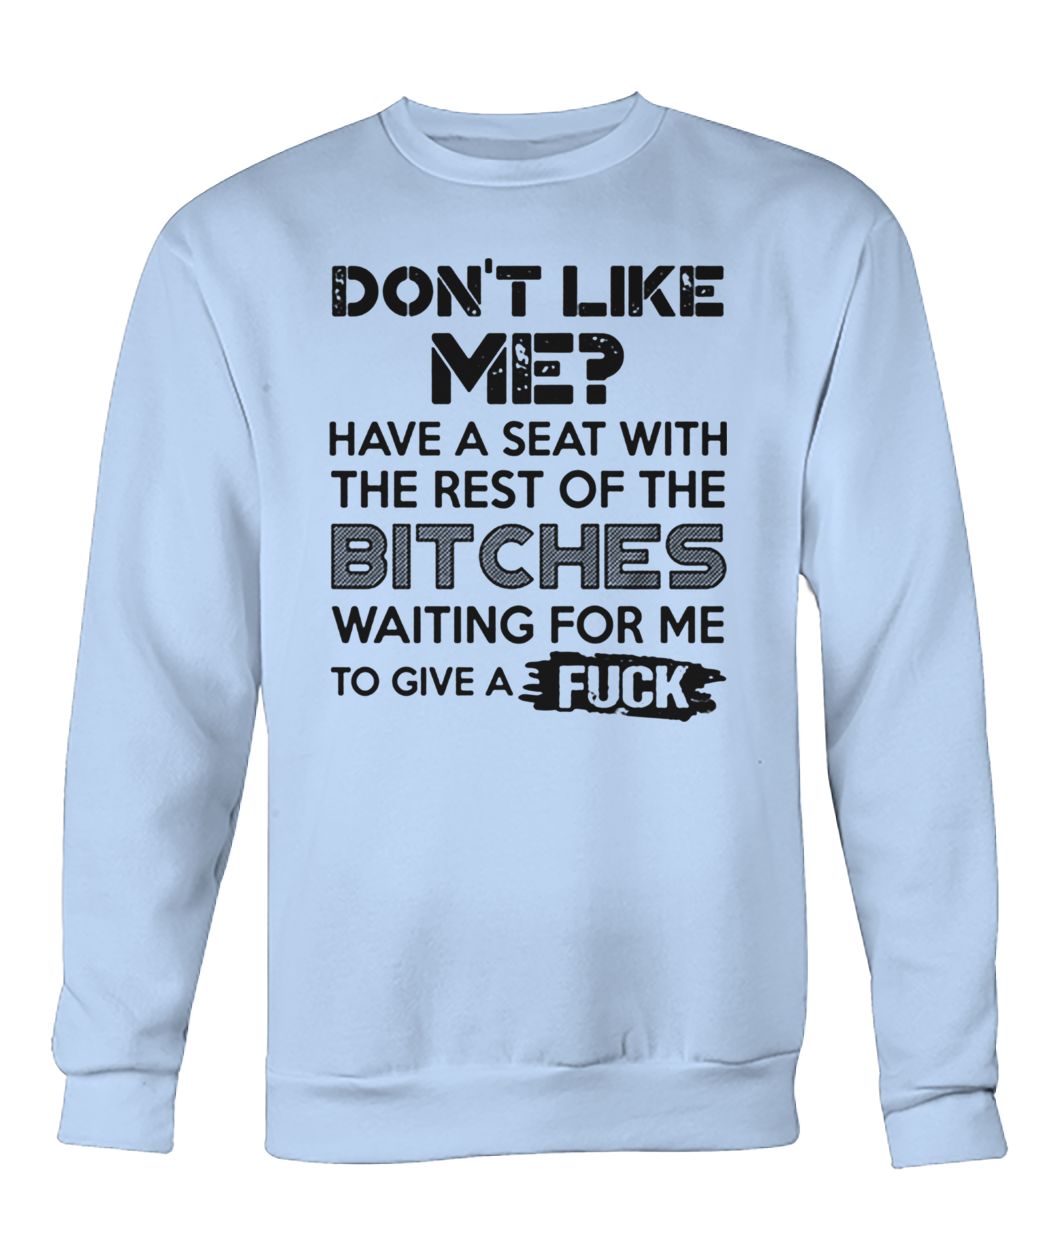 Don't like me have a seat with the rest of the bitches waiting for me sweatshirt